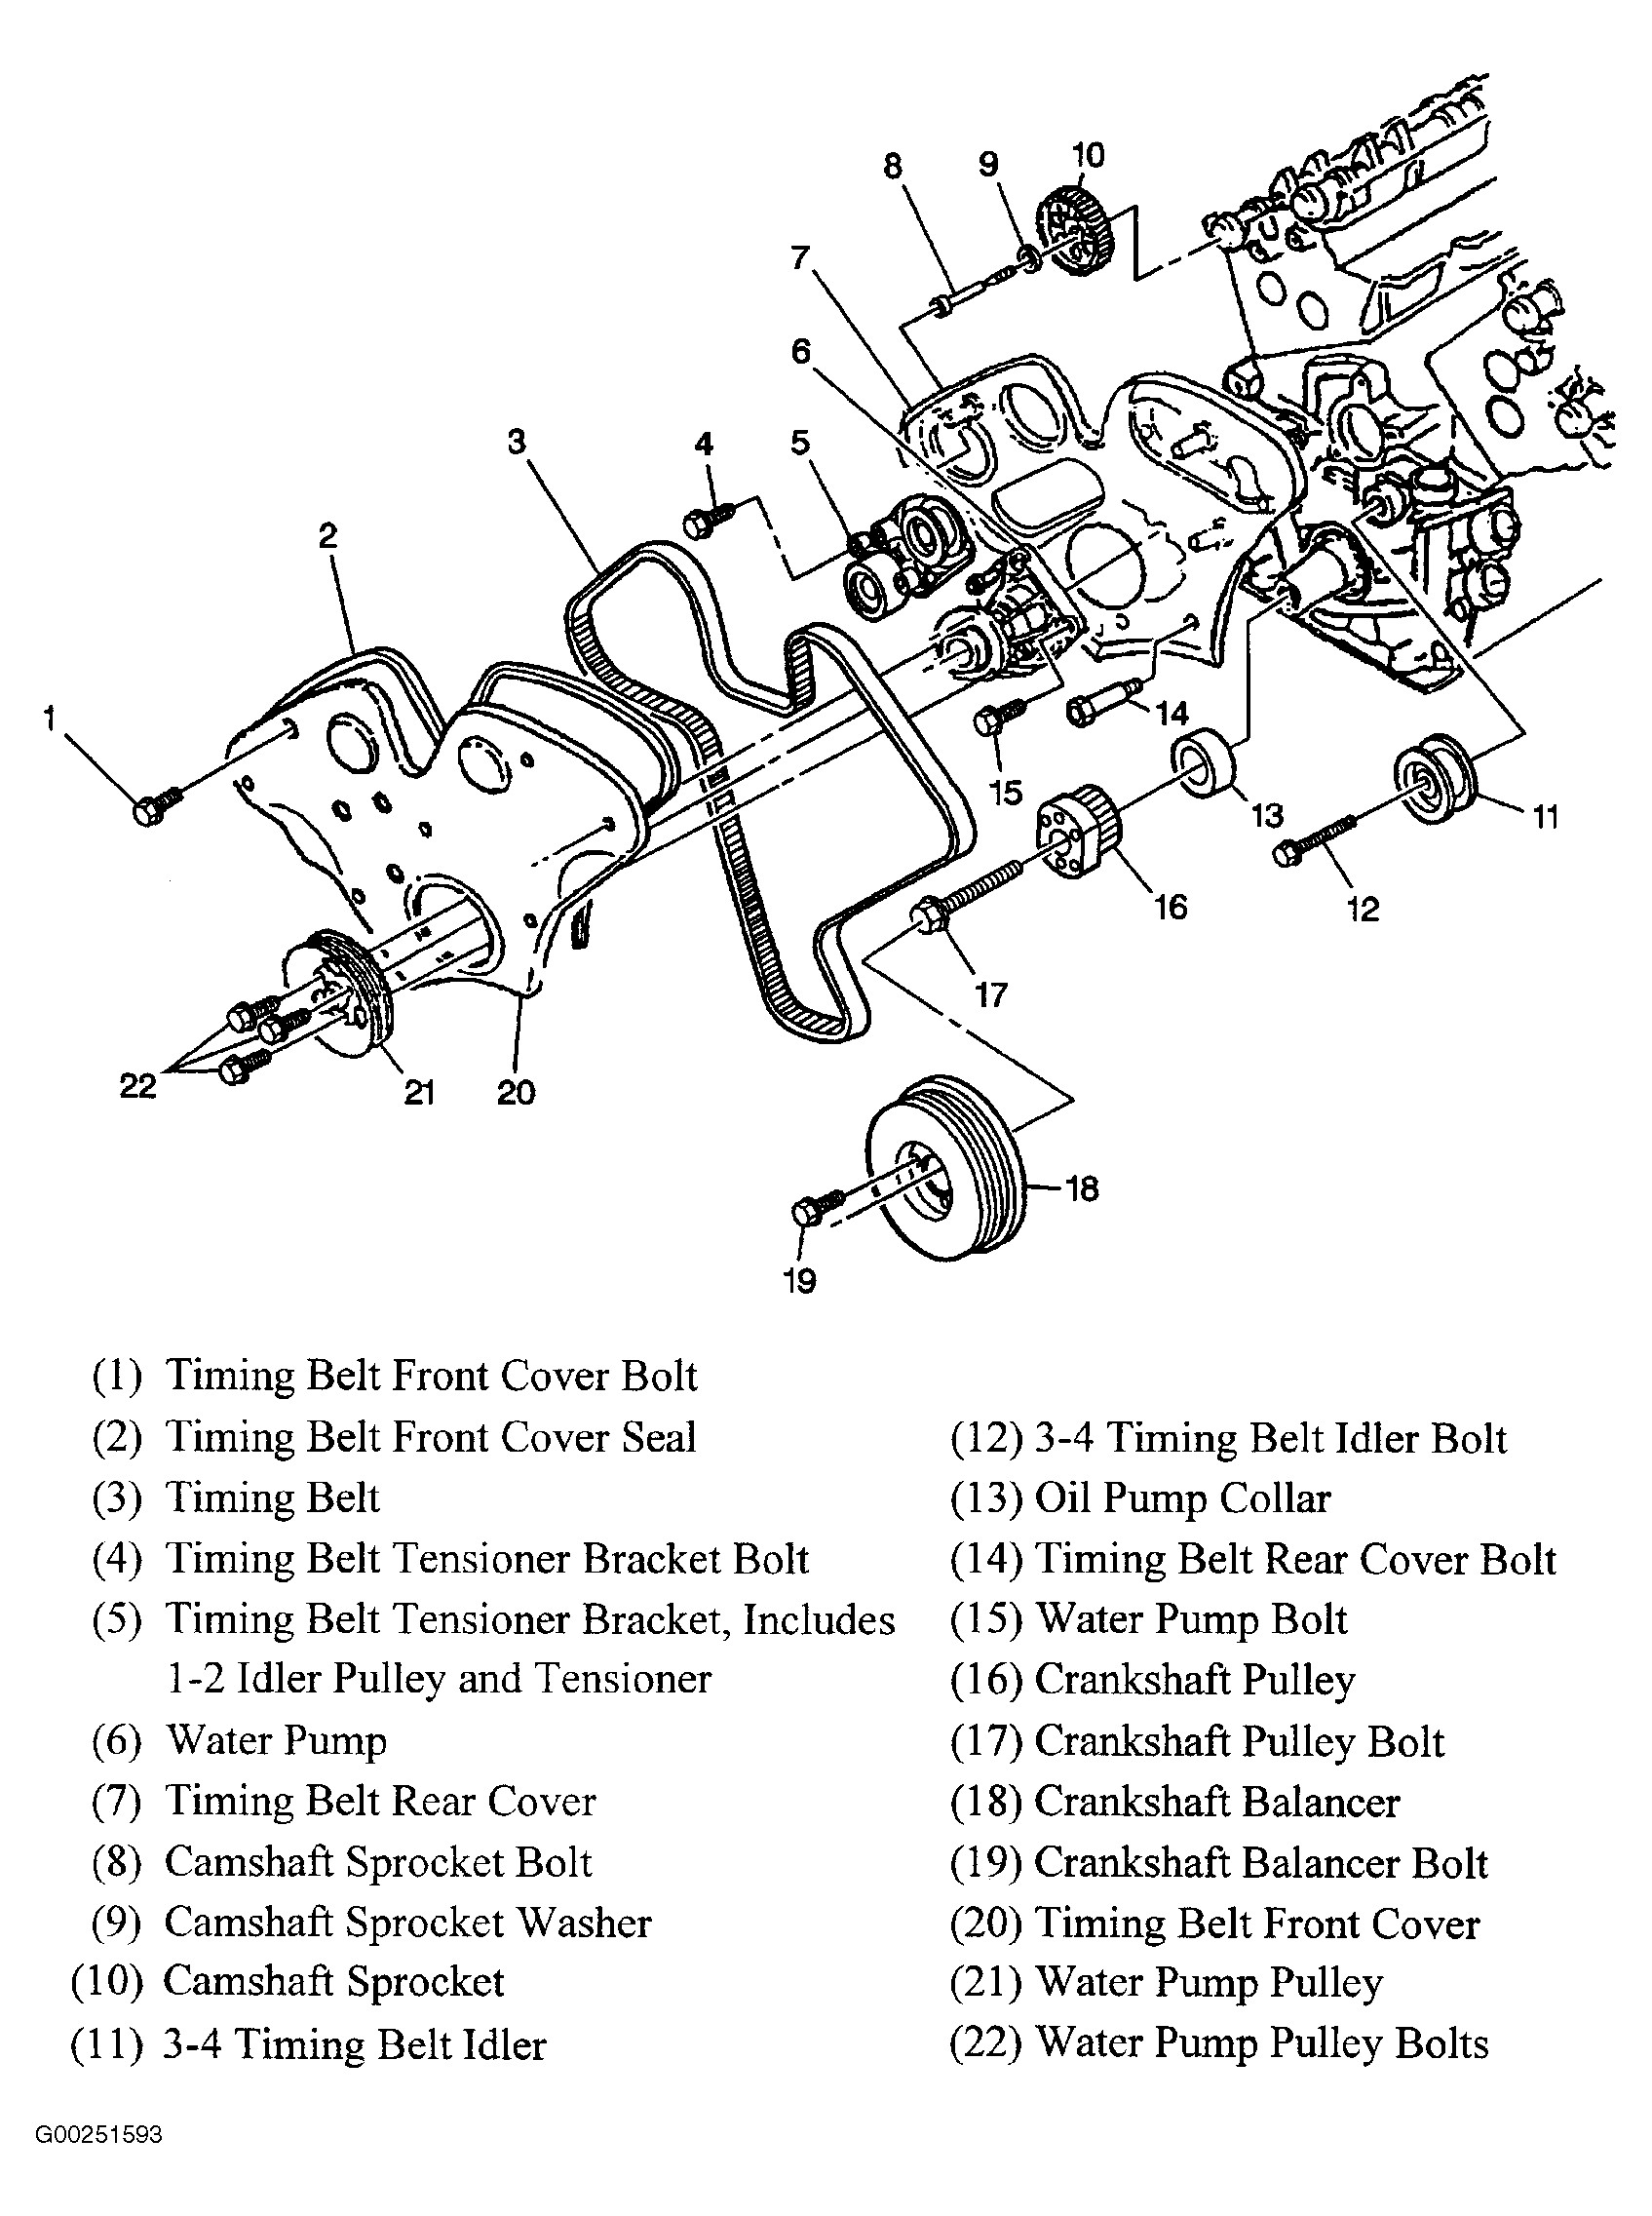 Car Engine Diagram with Labeled 2003 Cadillac Cts Serpentine Belt Diagram Auto Of Car Engine Diagram with Labeled